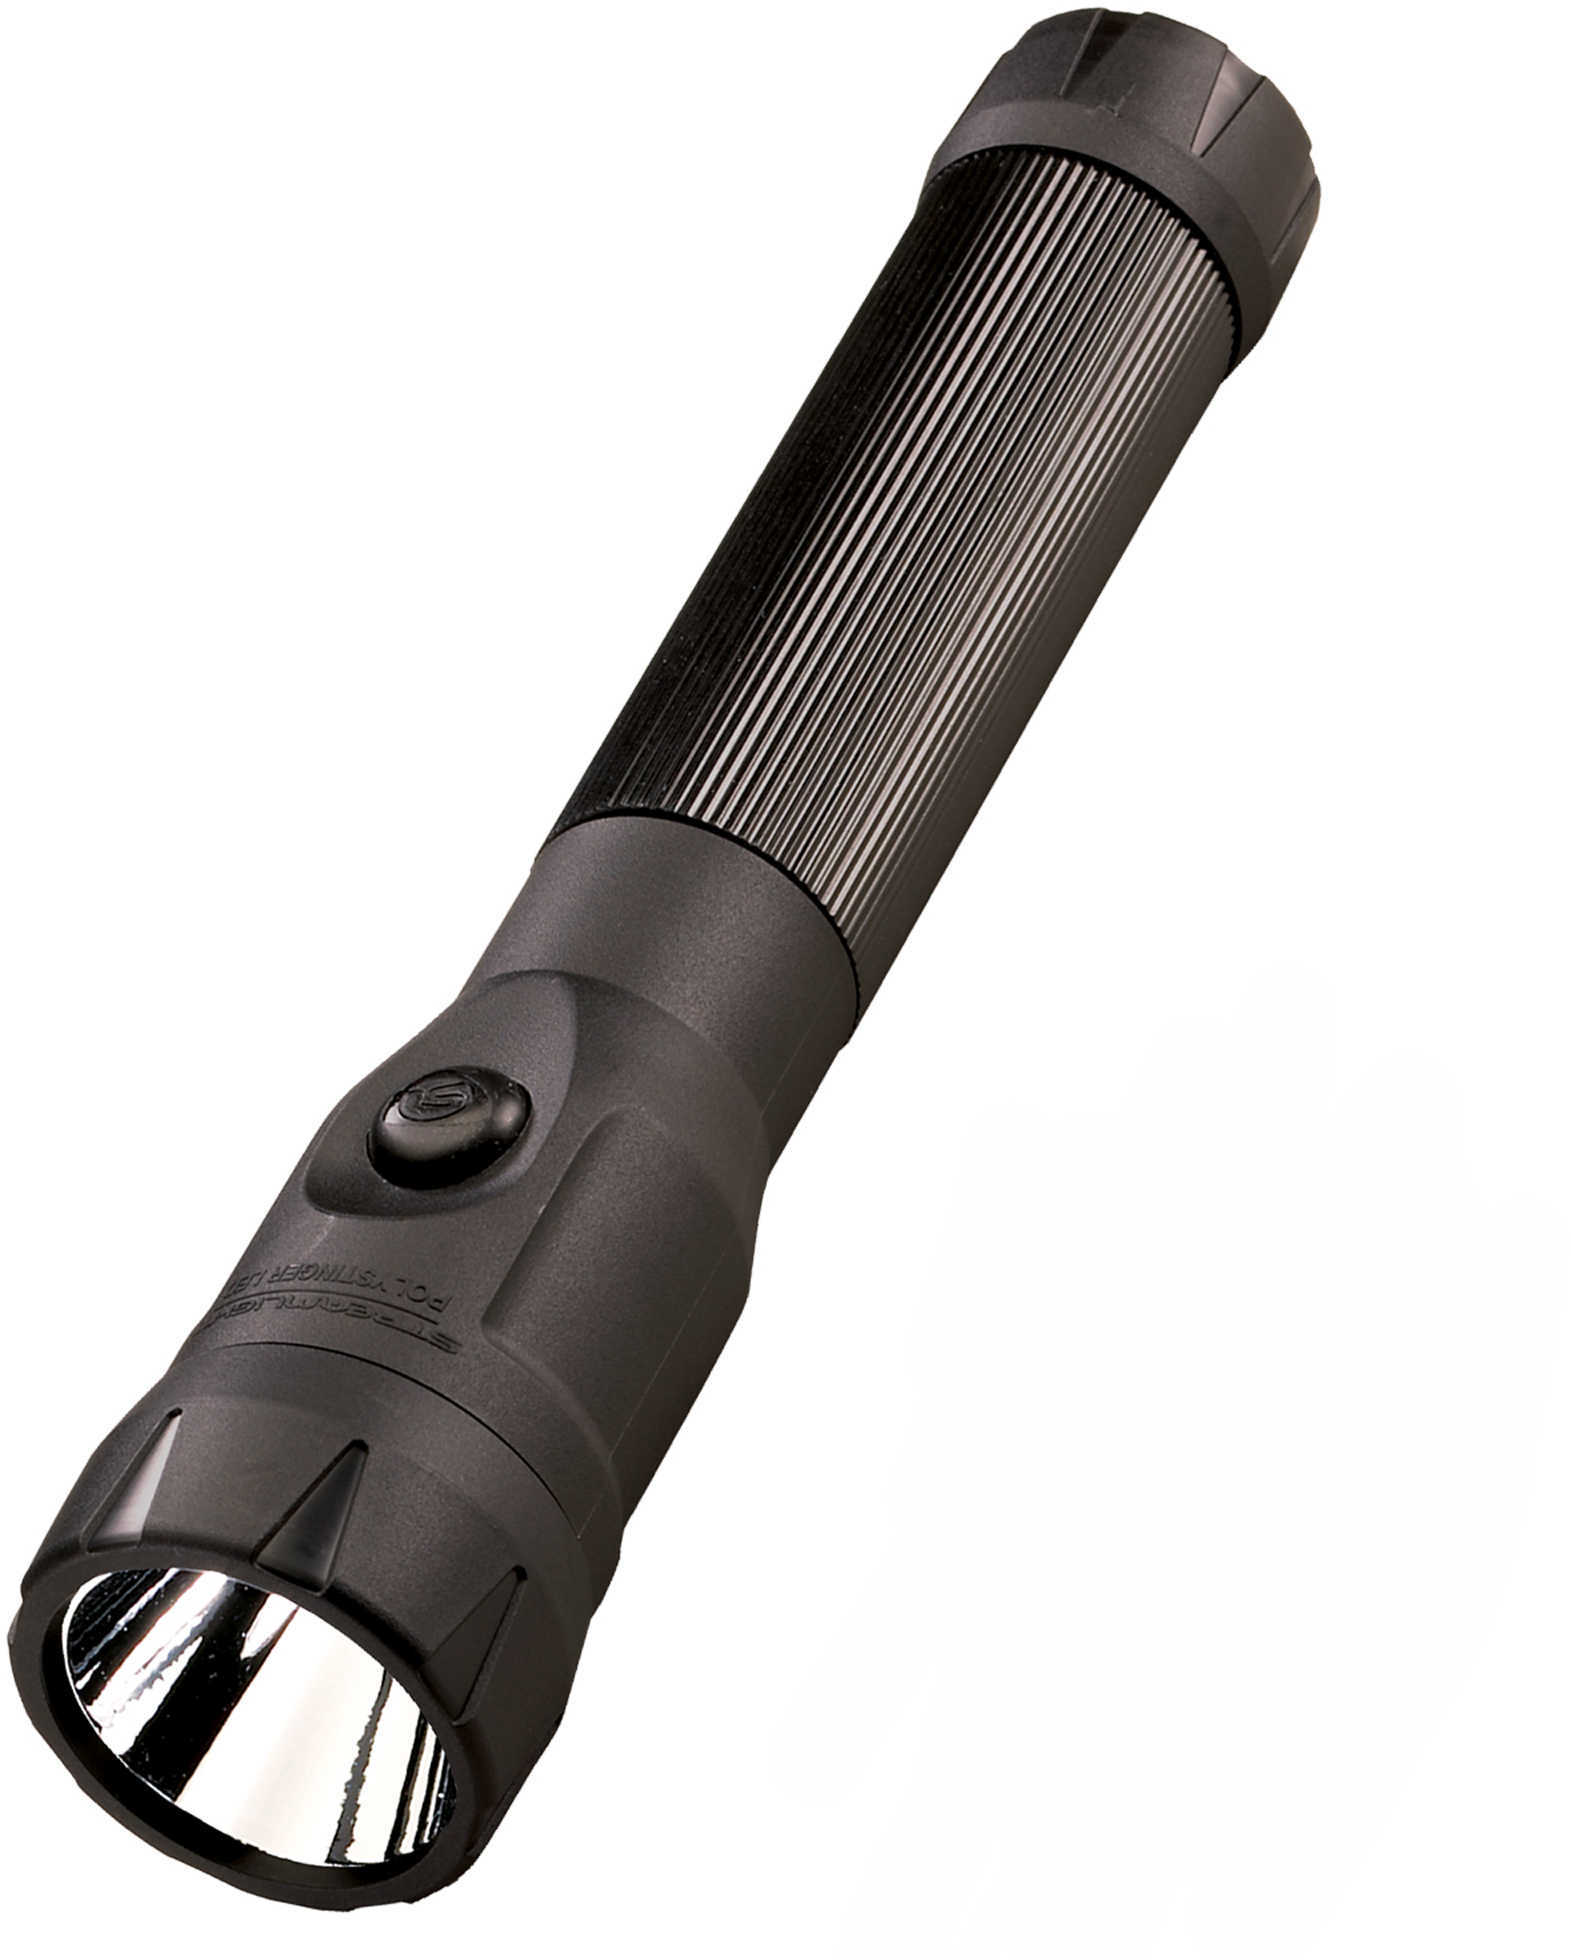 Streamlight 76112 PolyStinger LED Rechargeable Flashlight w/DC Charger Black